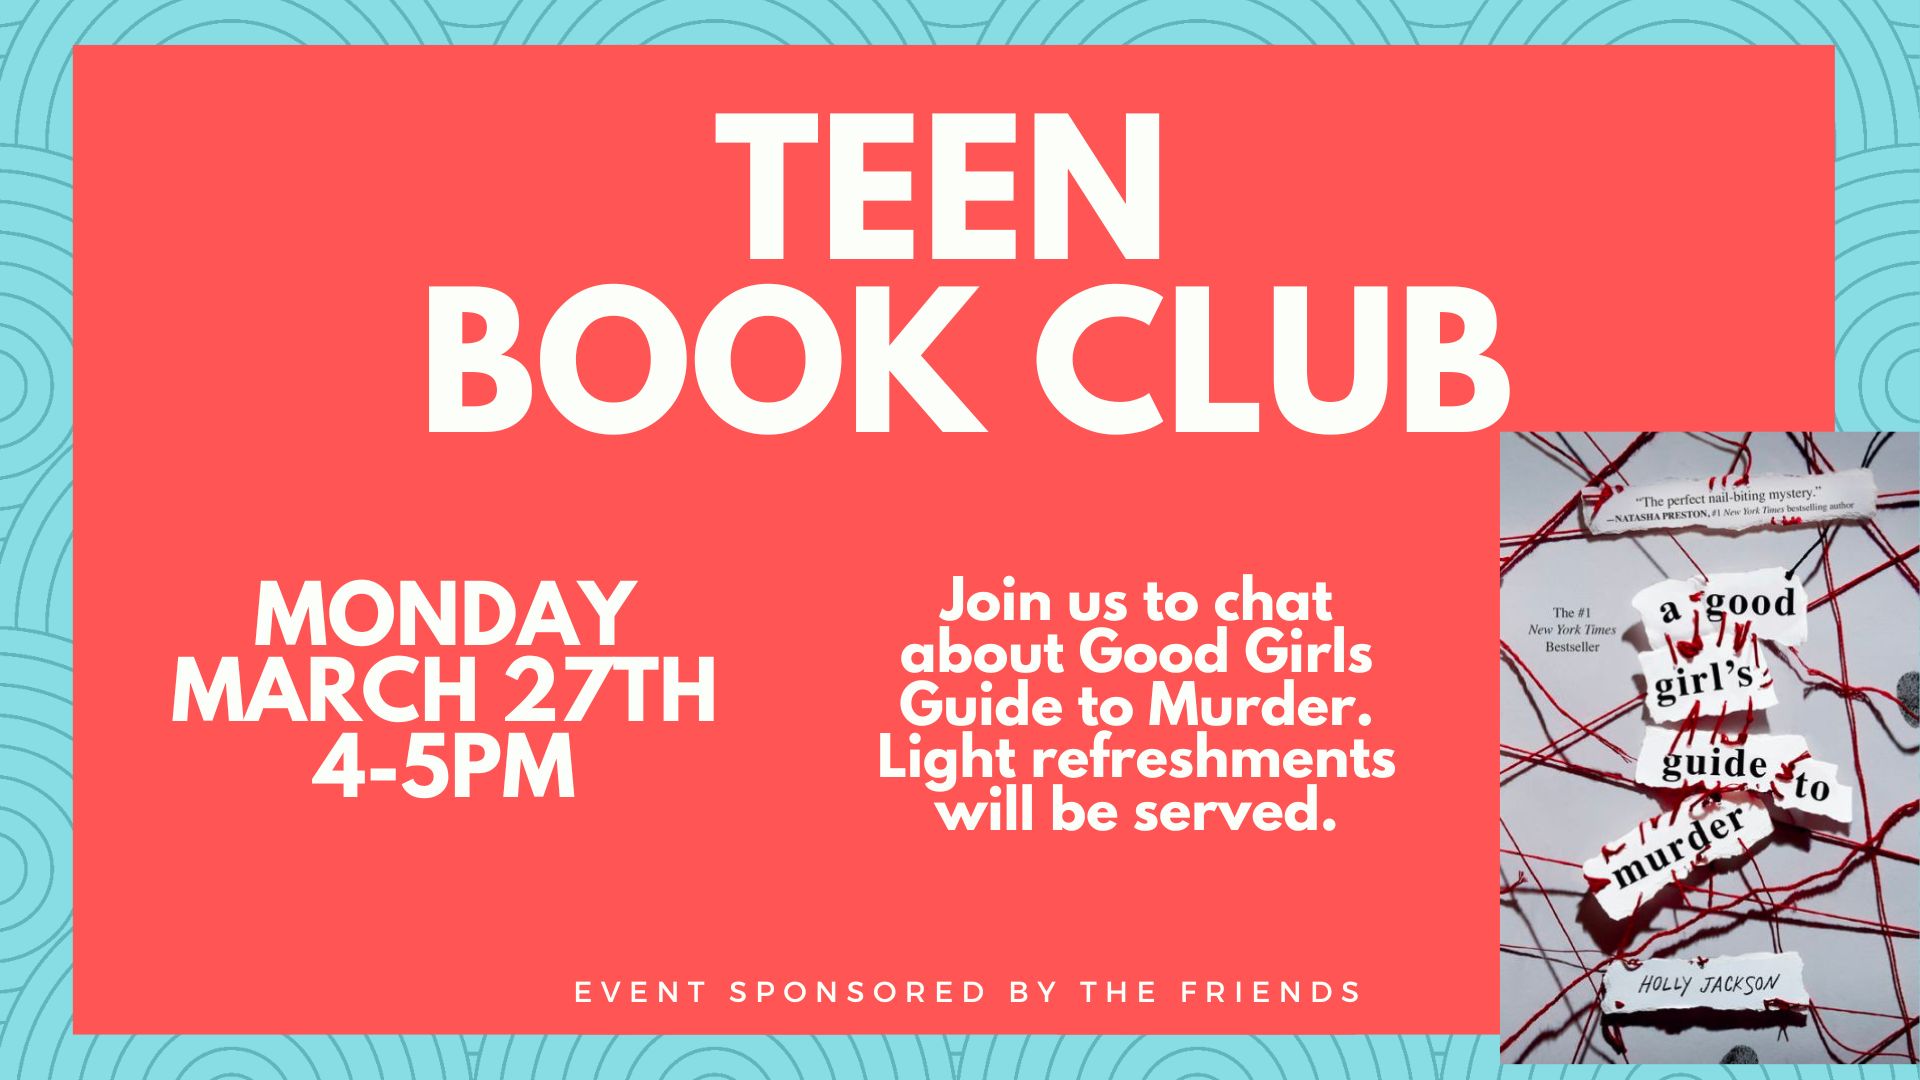 Teen book club promo. Red background, book cover, event description and time.